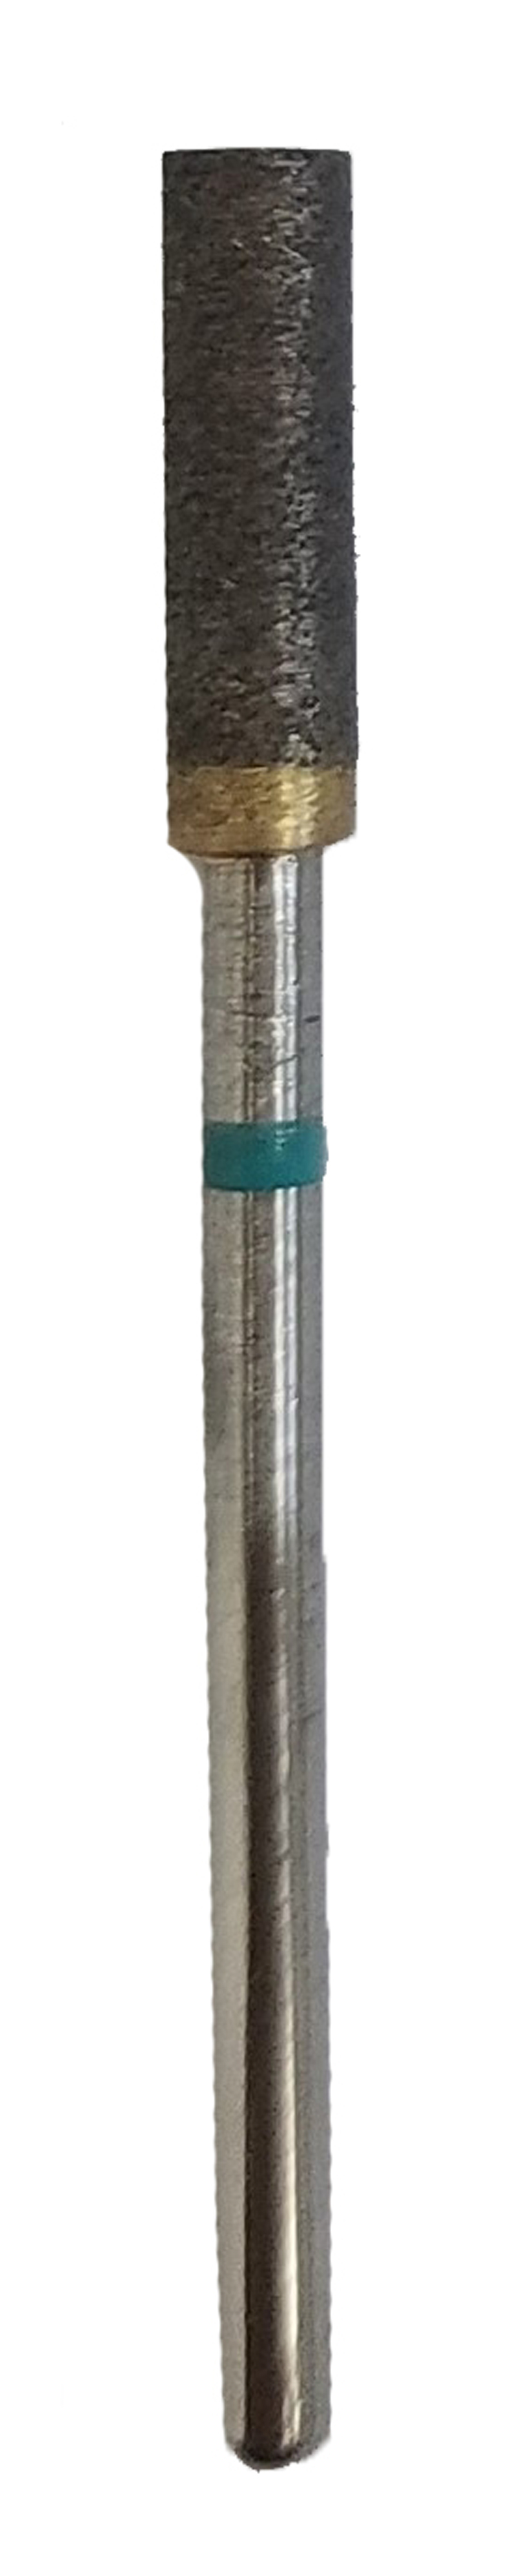 DIAMOND BUR, SINTERED, Coarse 120 grit 2.34mm mandrel(hp),Small CYLINDER, 5.4mm W X 13mm H - Click Image to Close